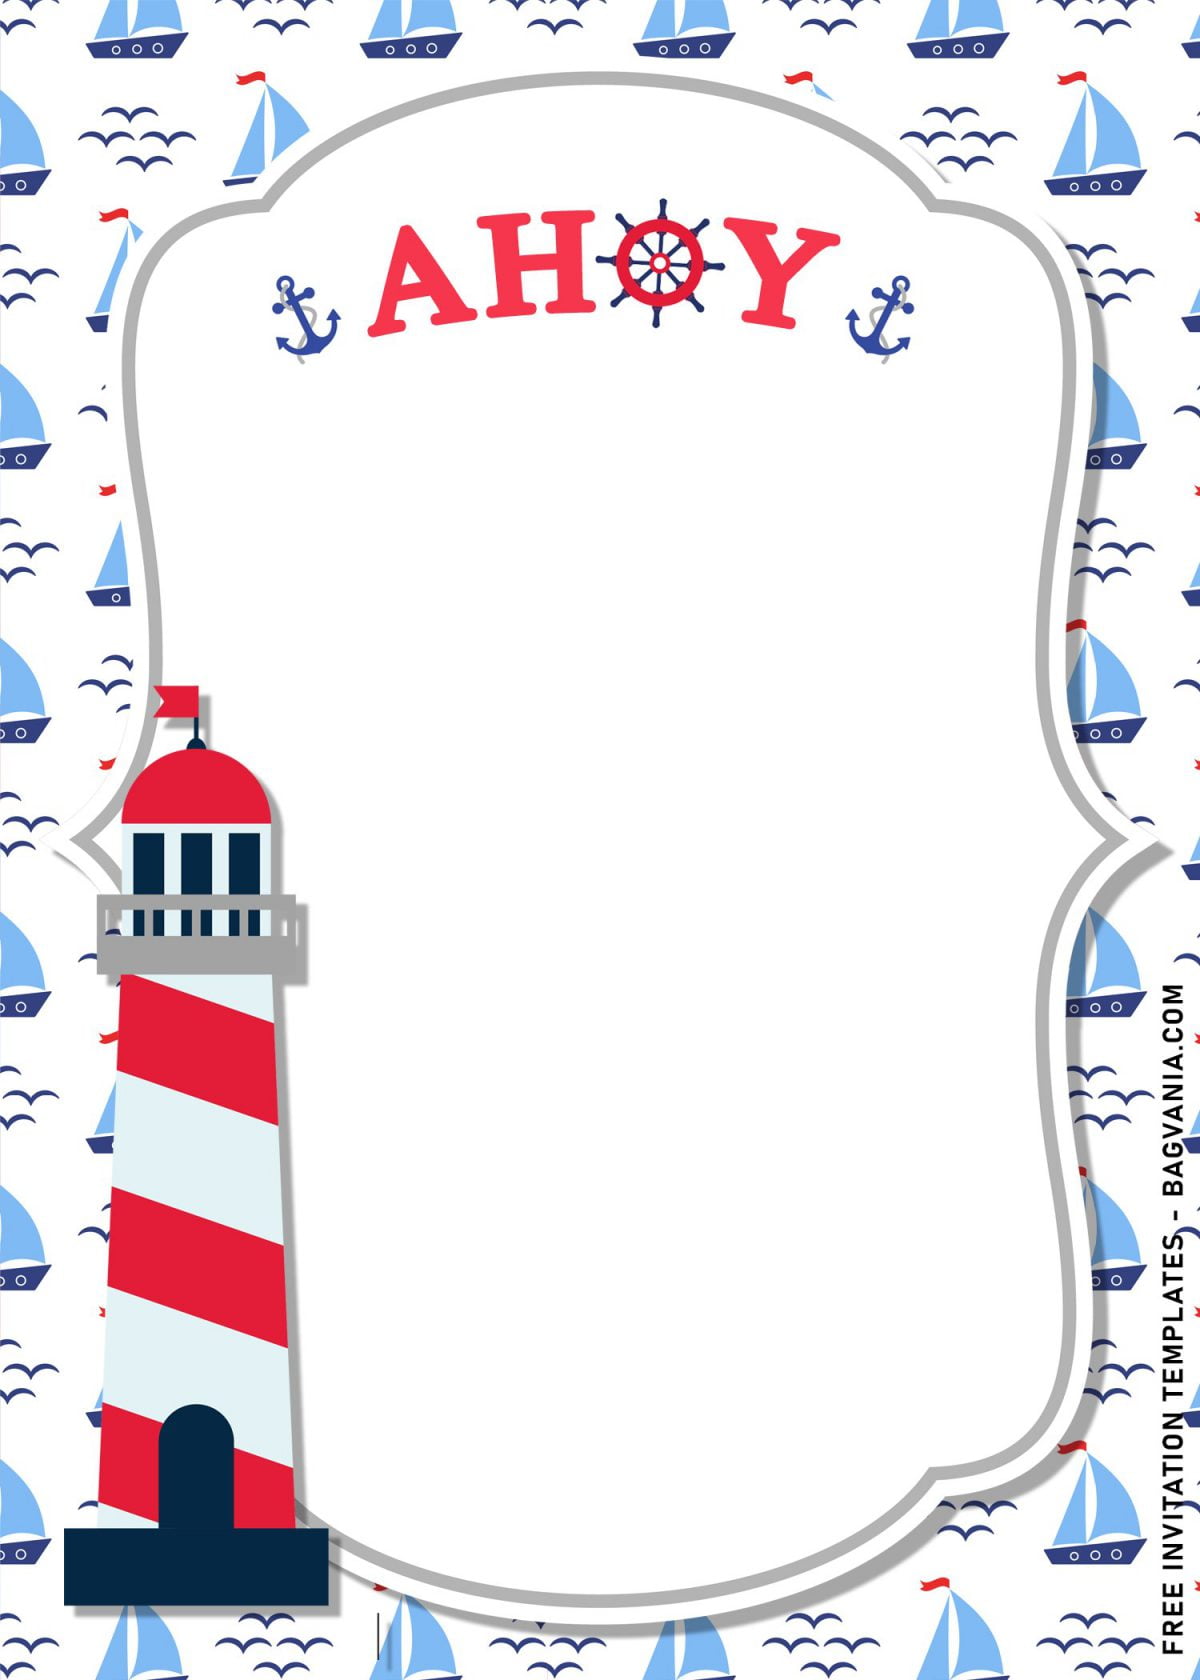 11+ Nautical Themed Birthday Invitation Templates For Your Kid’s Birthday Bash and has blue anchors